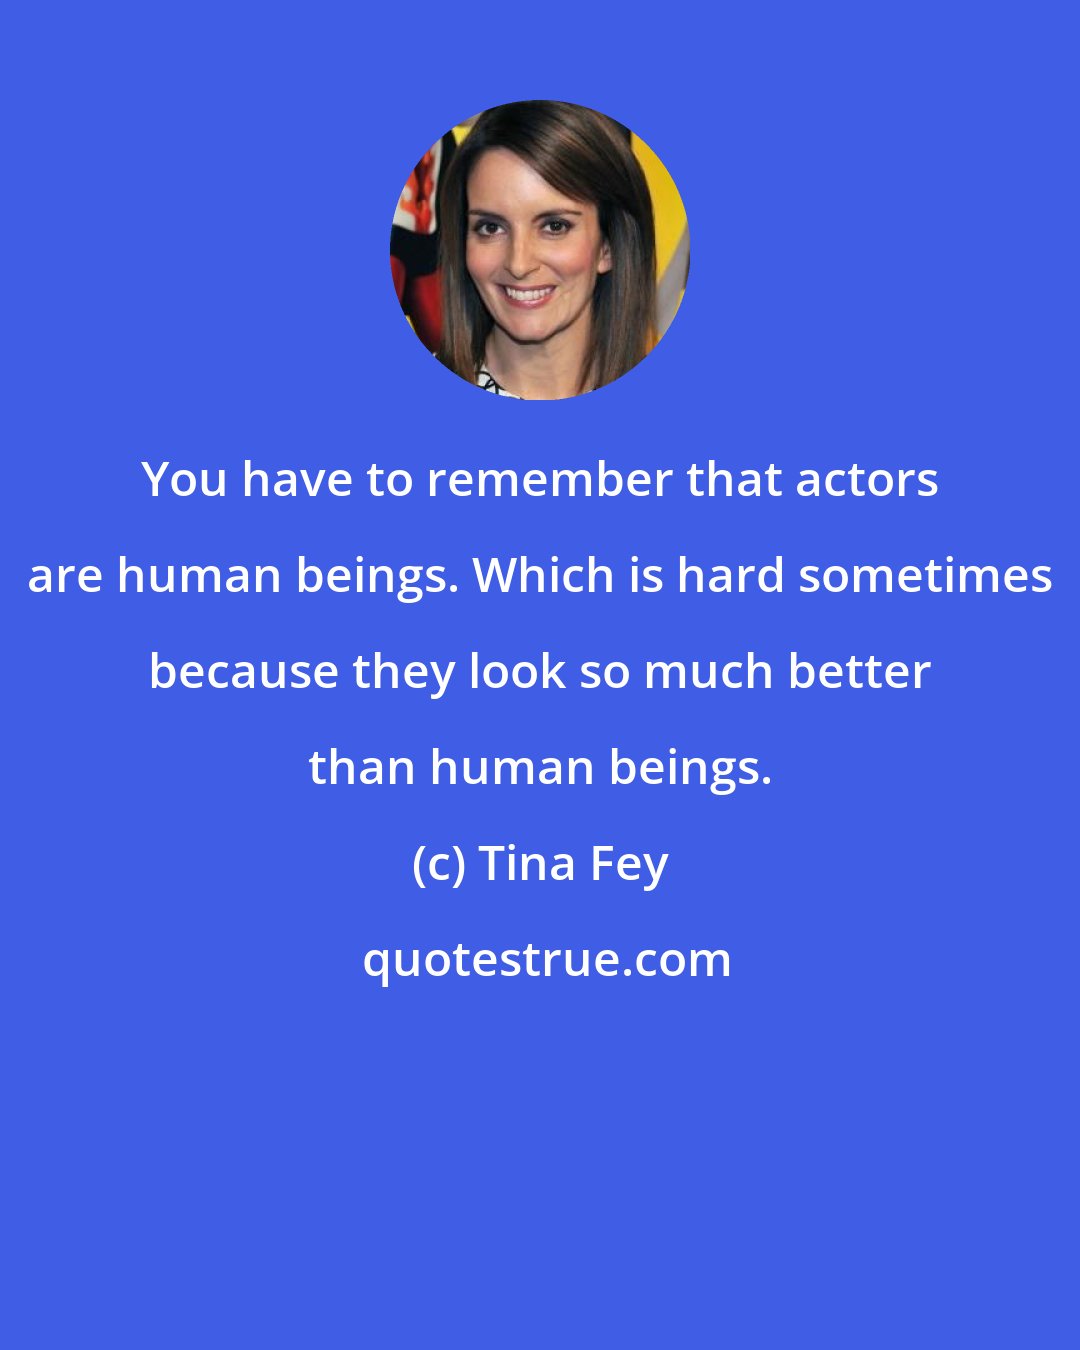 Tina Fey: You have to remember that actors are human beings. Which is hard sometimes because they look so much better than human beings.